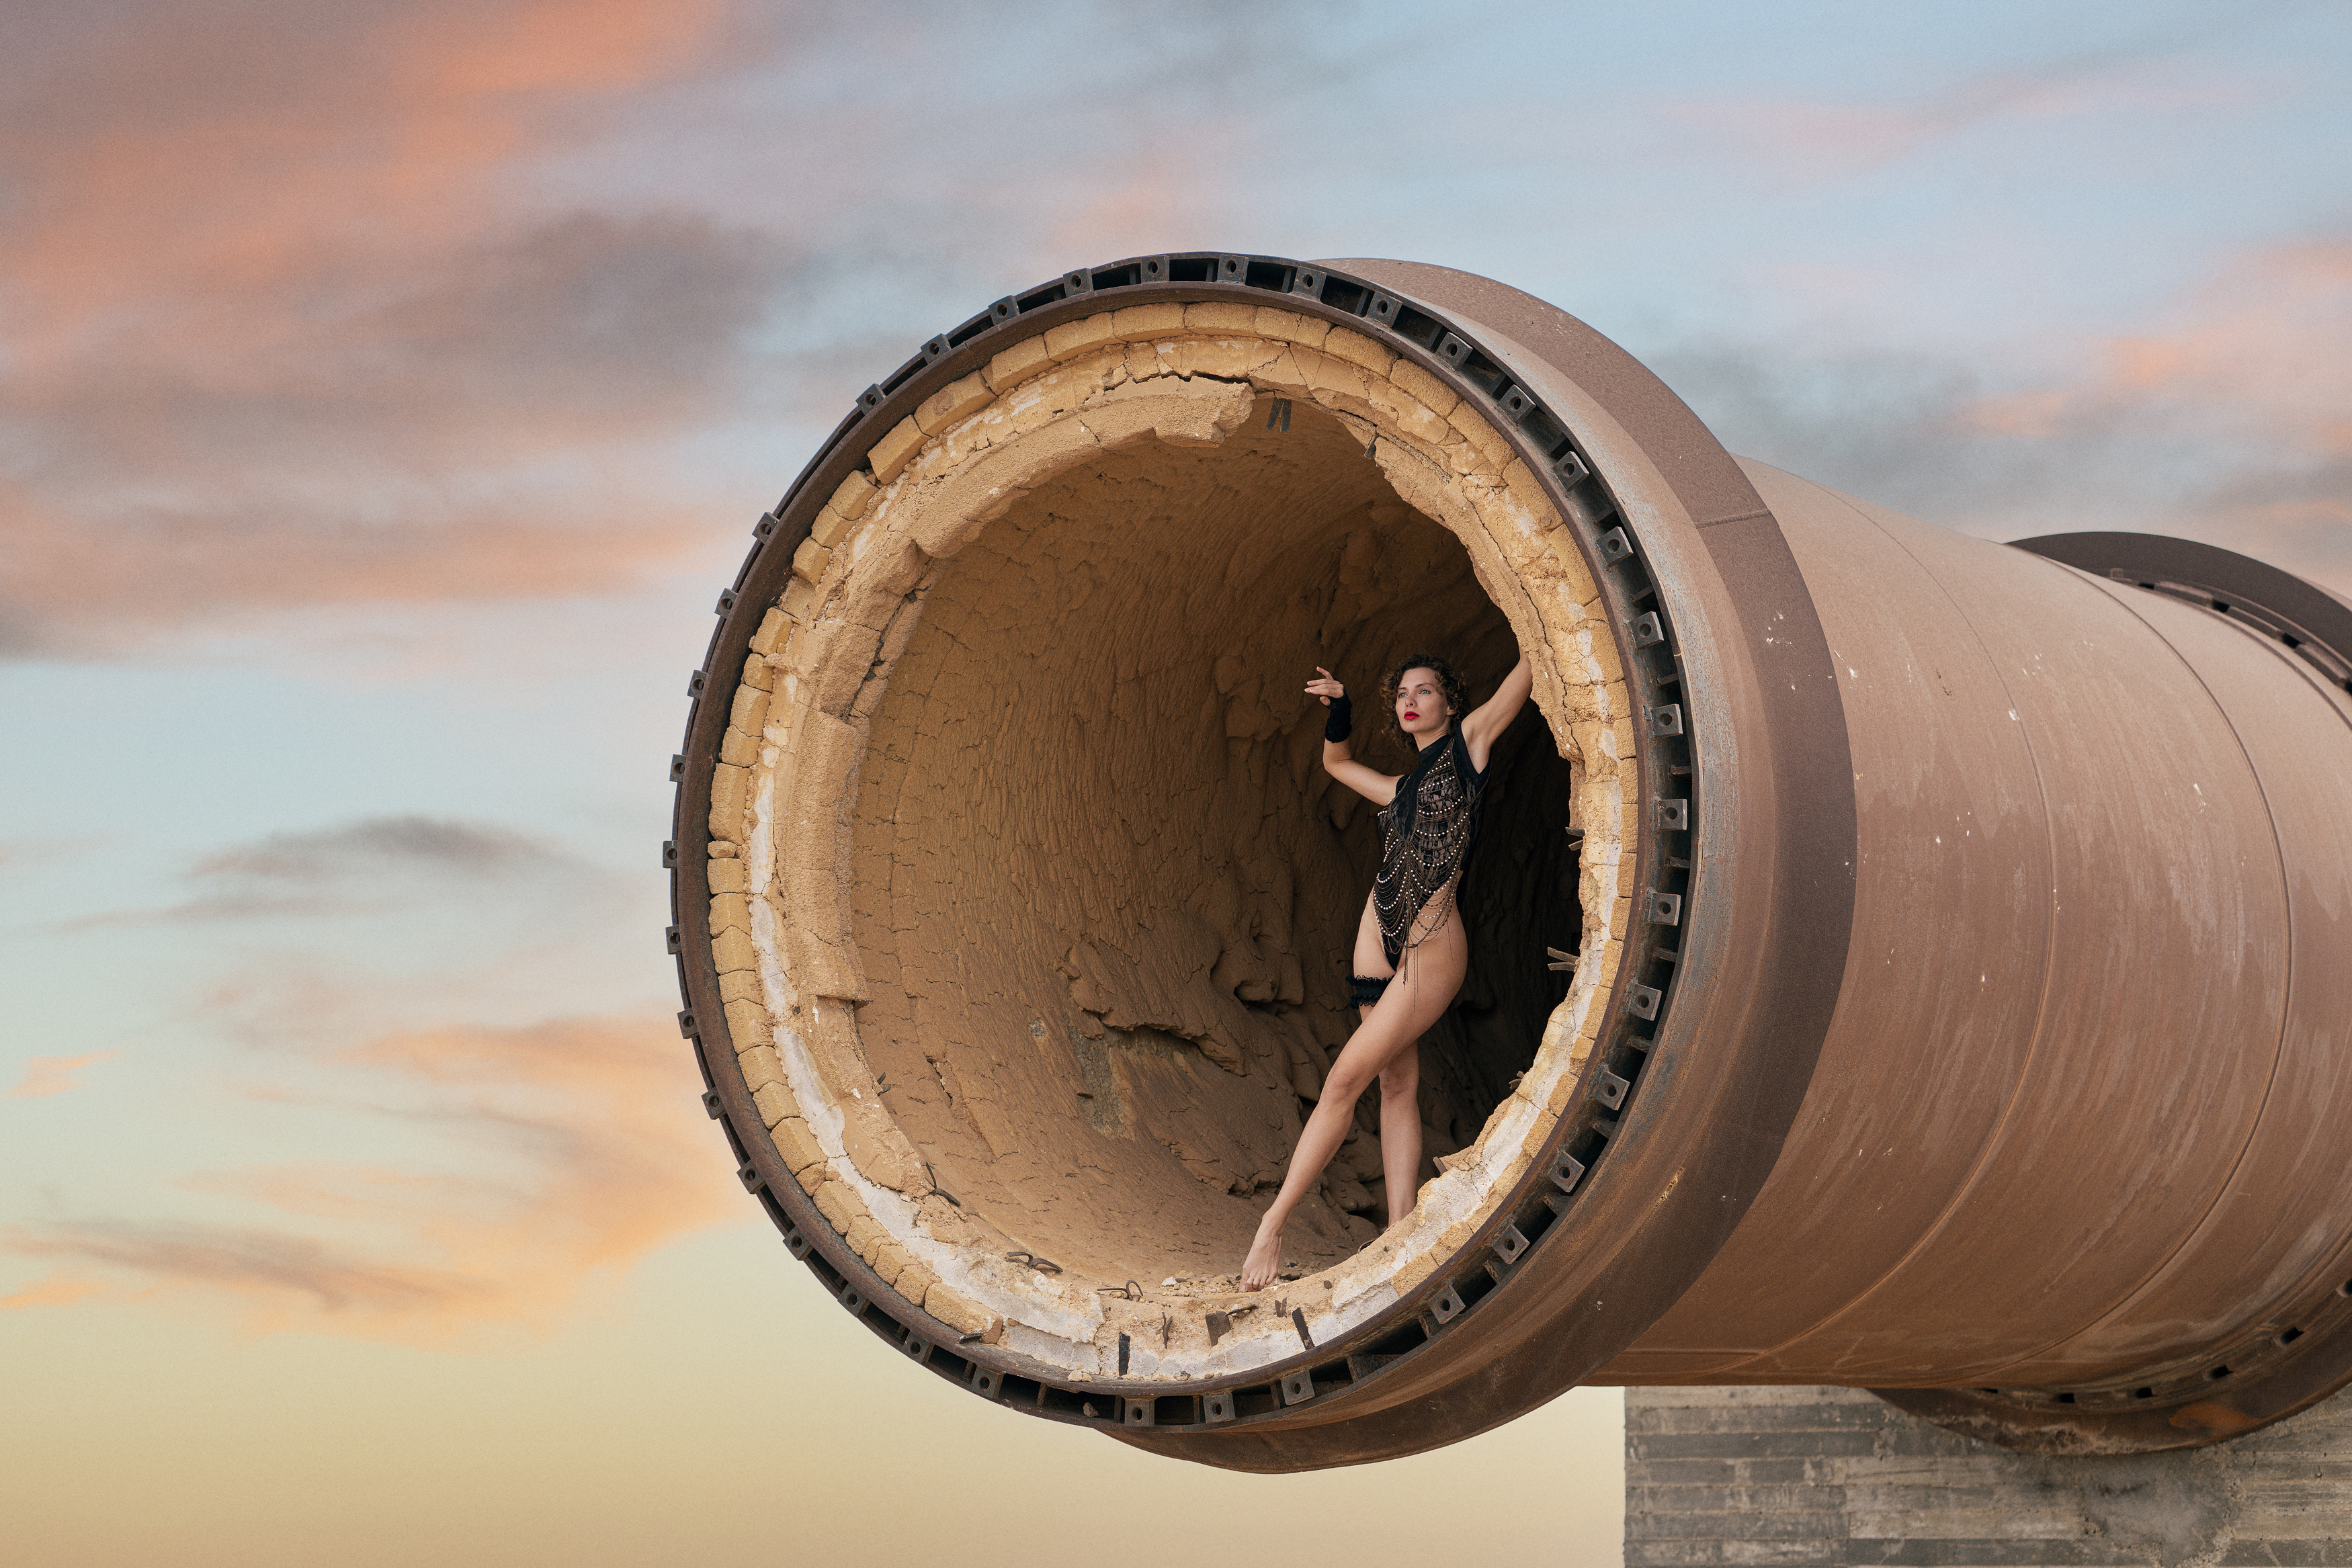 abandoned building, beautiful woman, clouds, dreaminess, elegance, female, grace, individuality, lifestyles, lingerie, looking, makhtesh ramon, one person, outdoors, pipe, sensuality, side view, skies, standing, sunrise, underwear, young women, Alex Tsarfin